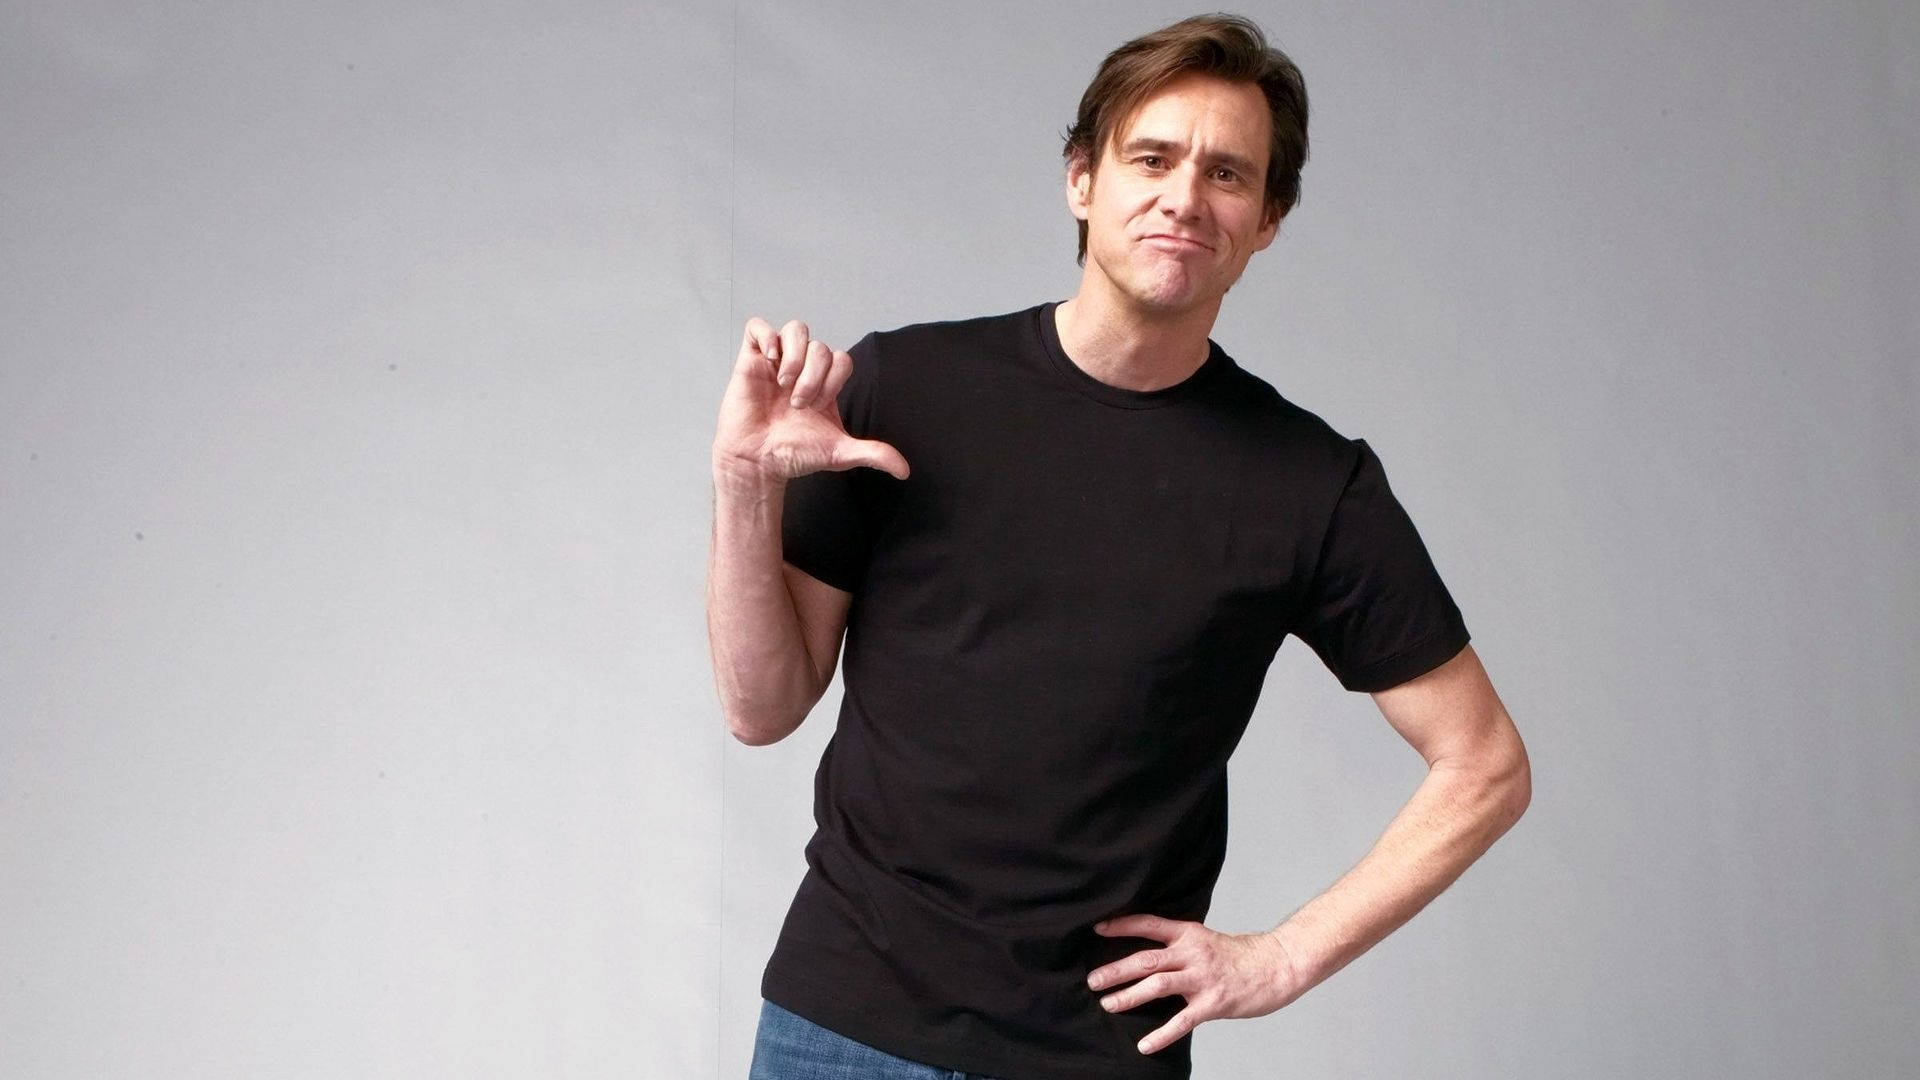 Jim Carrey Cutely Booing Background